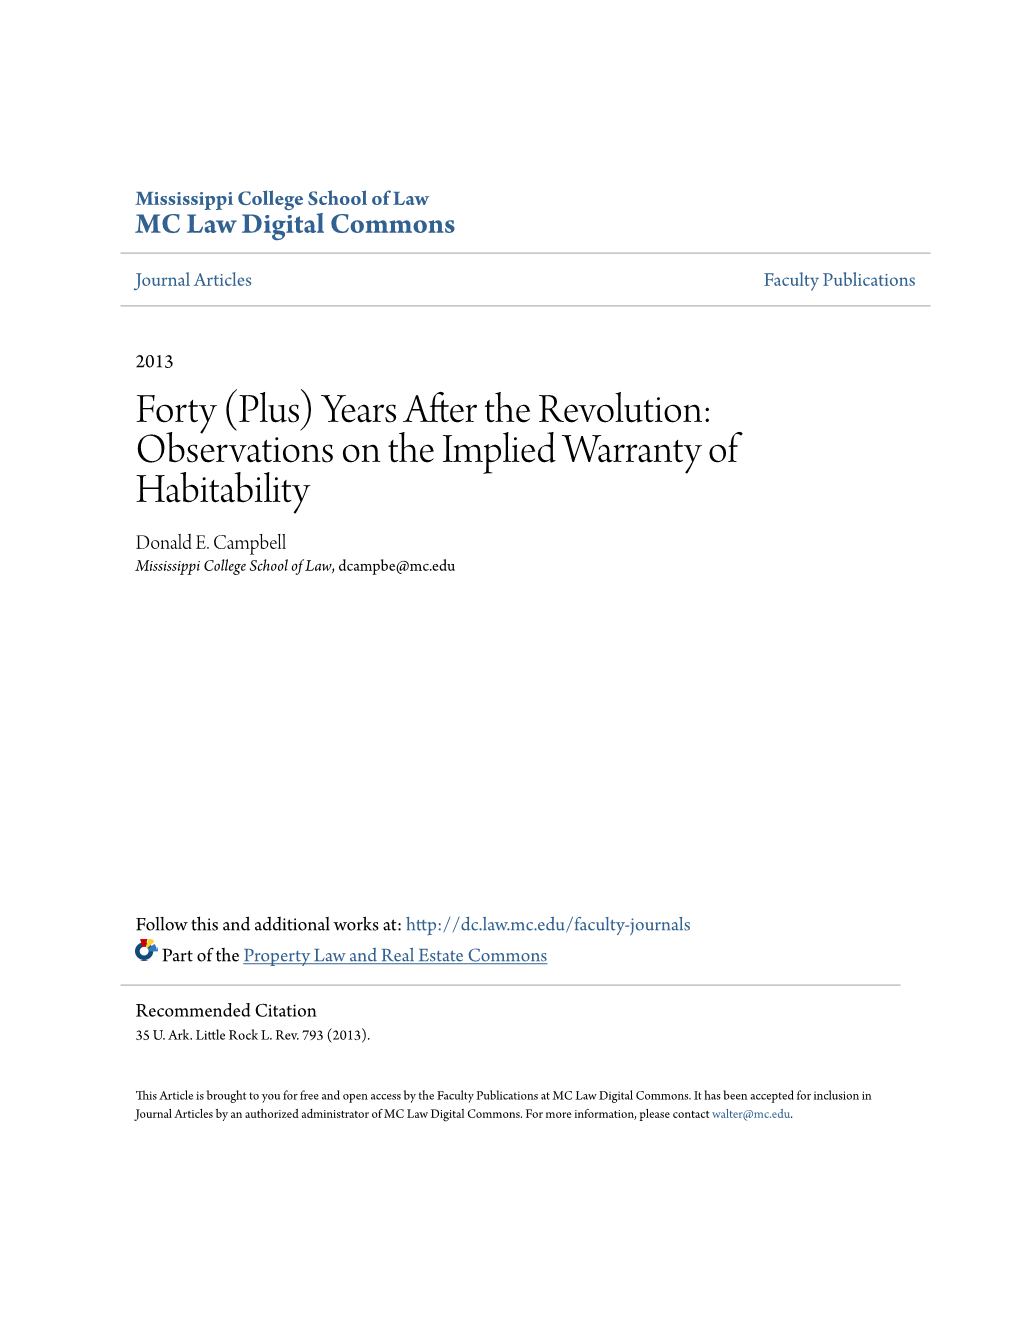 Observations on the Implied Warranty of Habitability Donald E